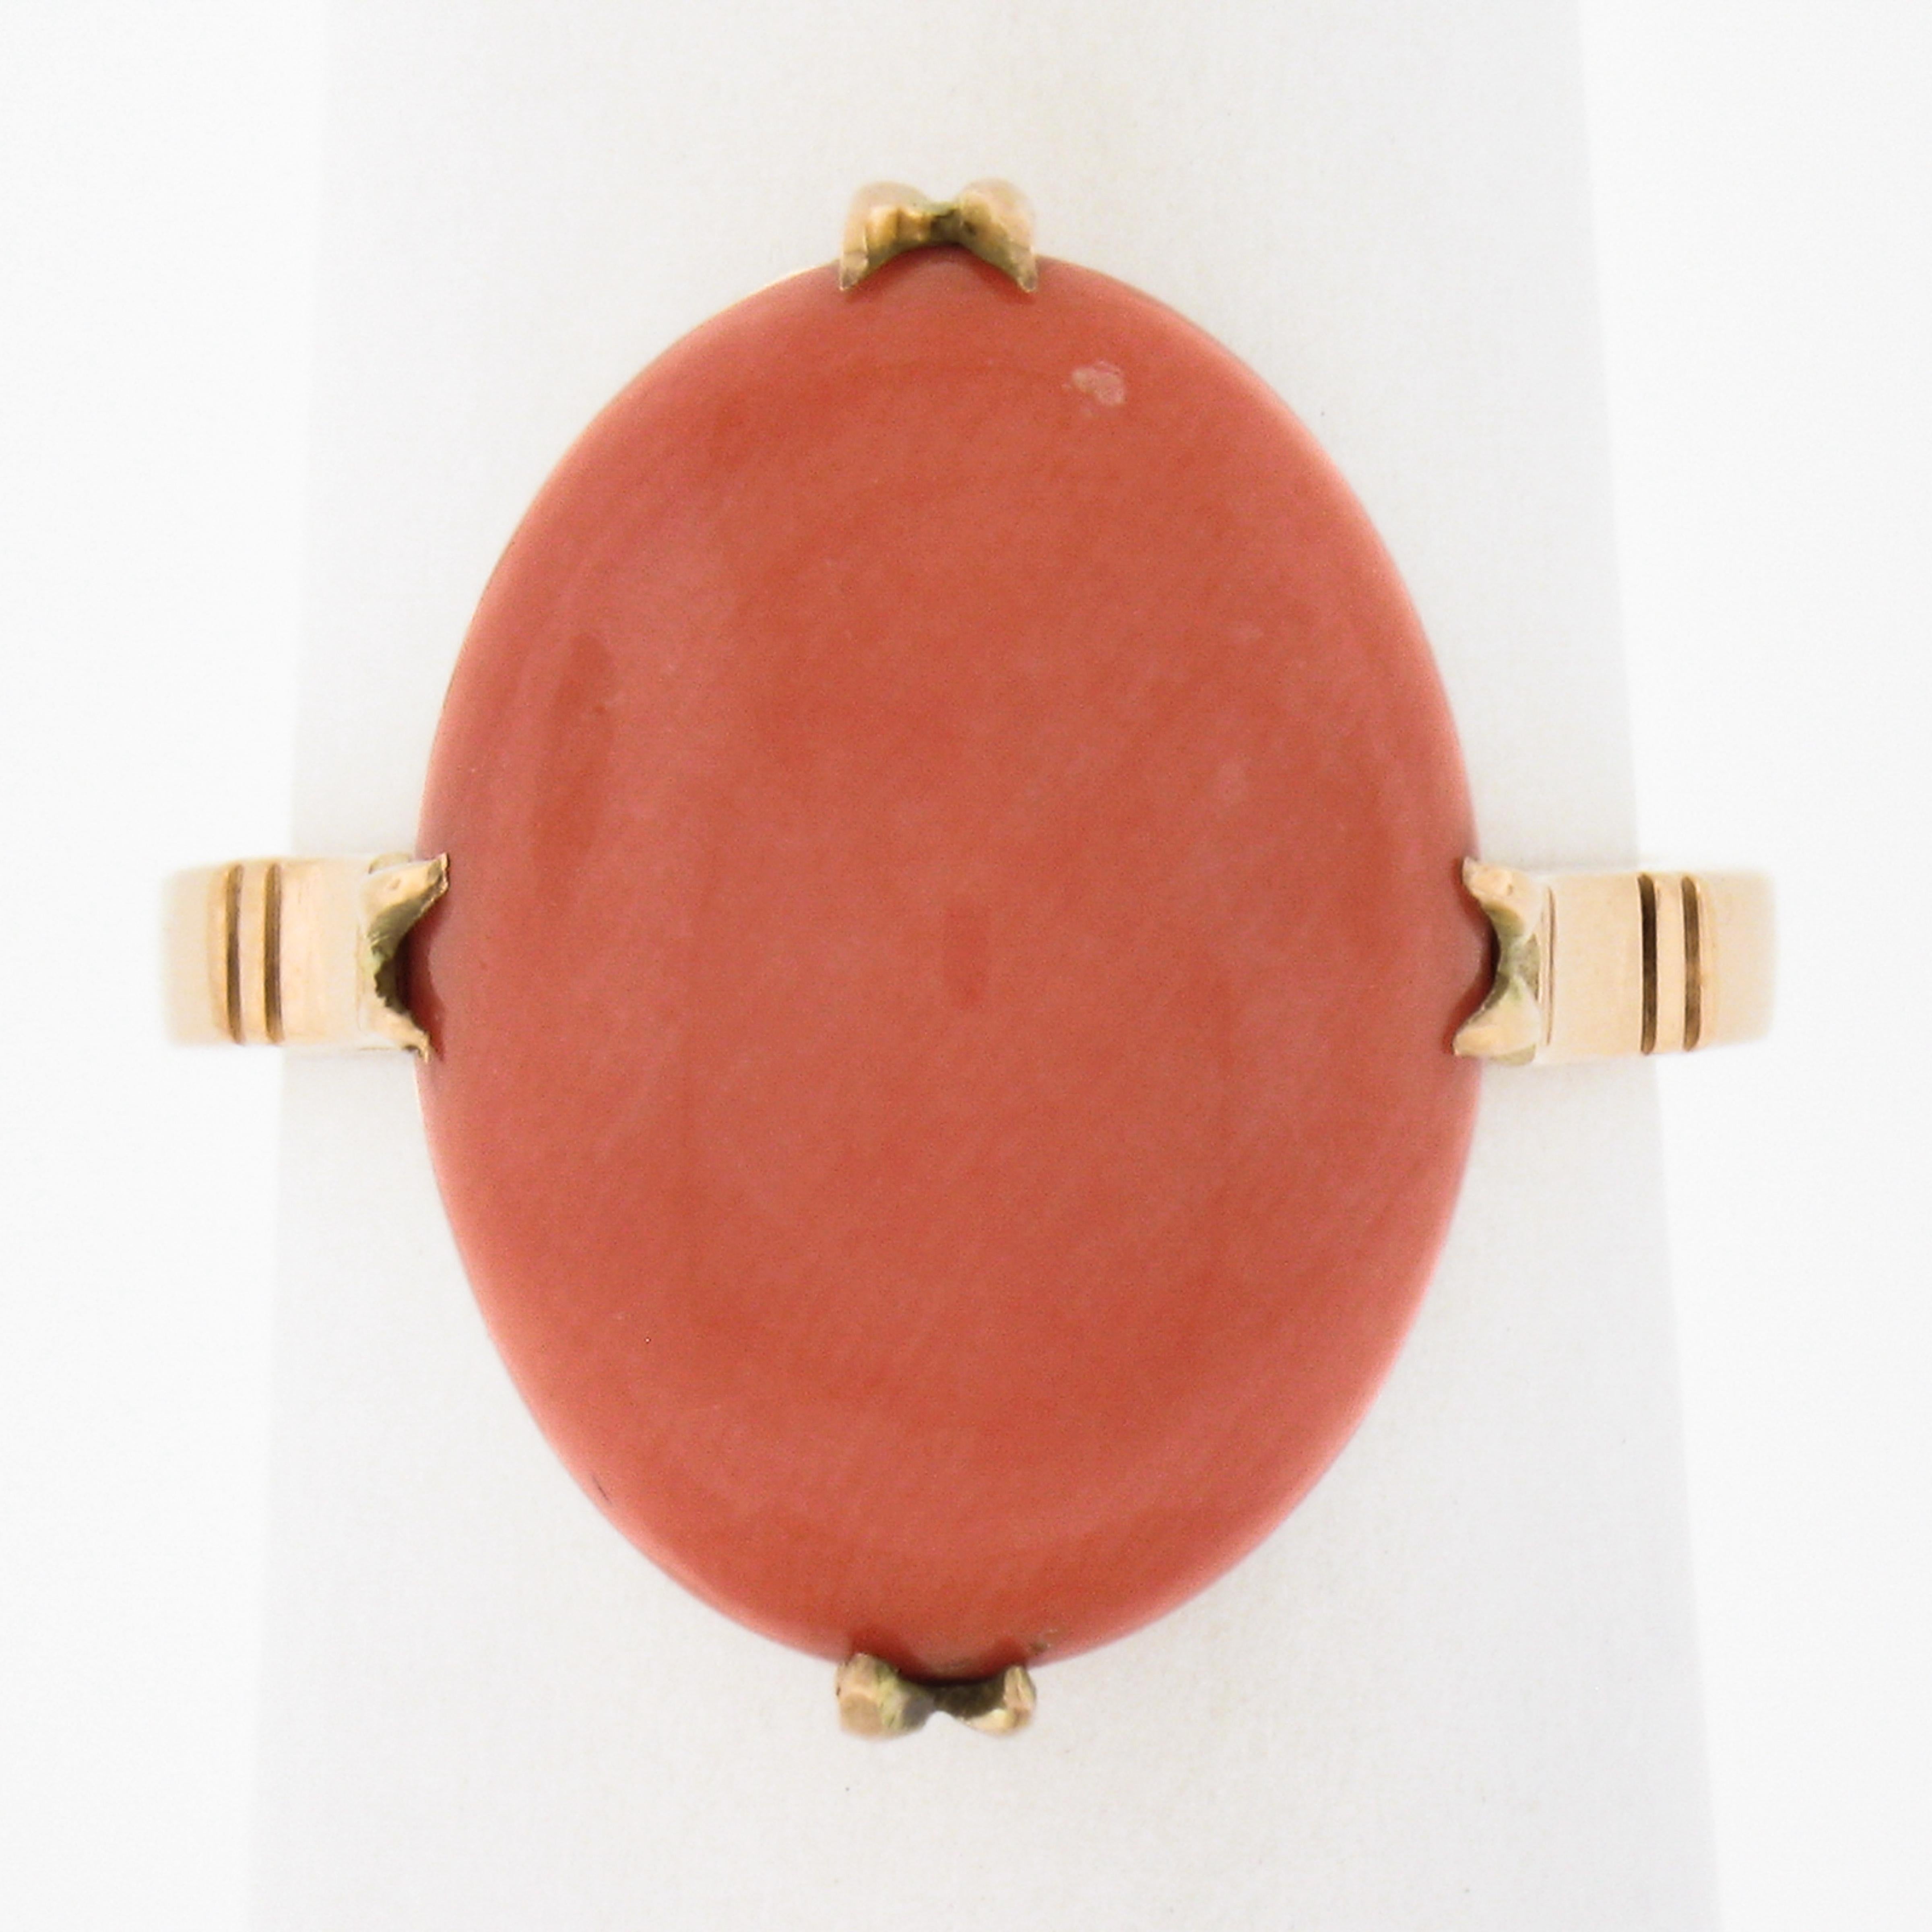 This classic and truly wonderful vintage coral ring is very well crafted in 14k yellow gold and features a gorgeous, natural coral stone that's certified by GIA. The coral displays a very pleasant and soothing salmon orange color and has no